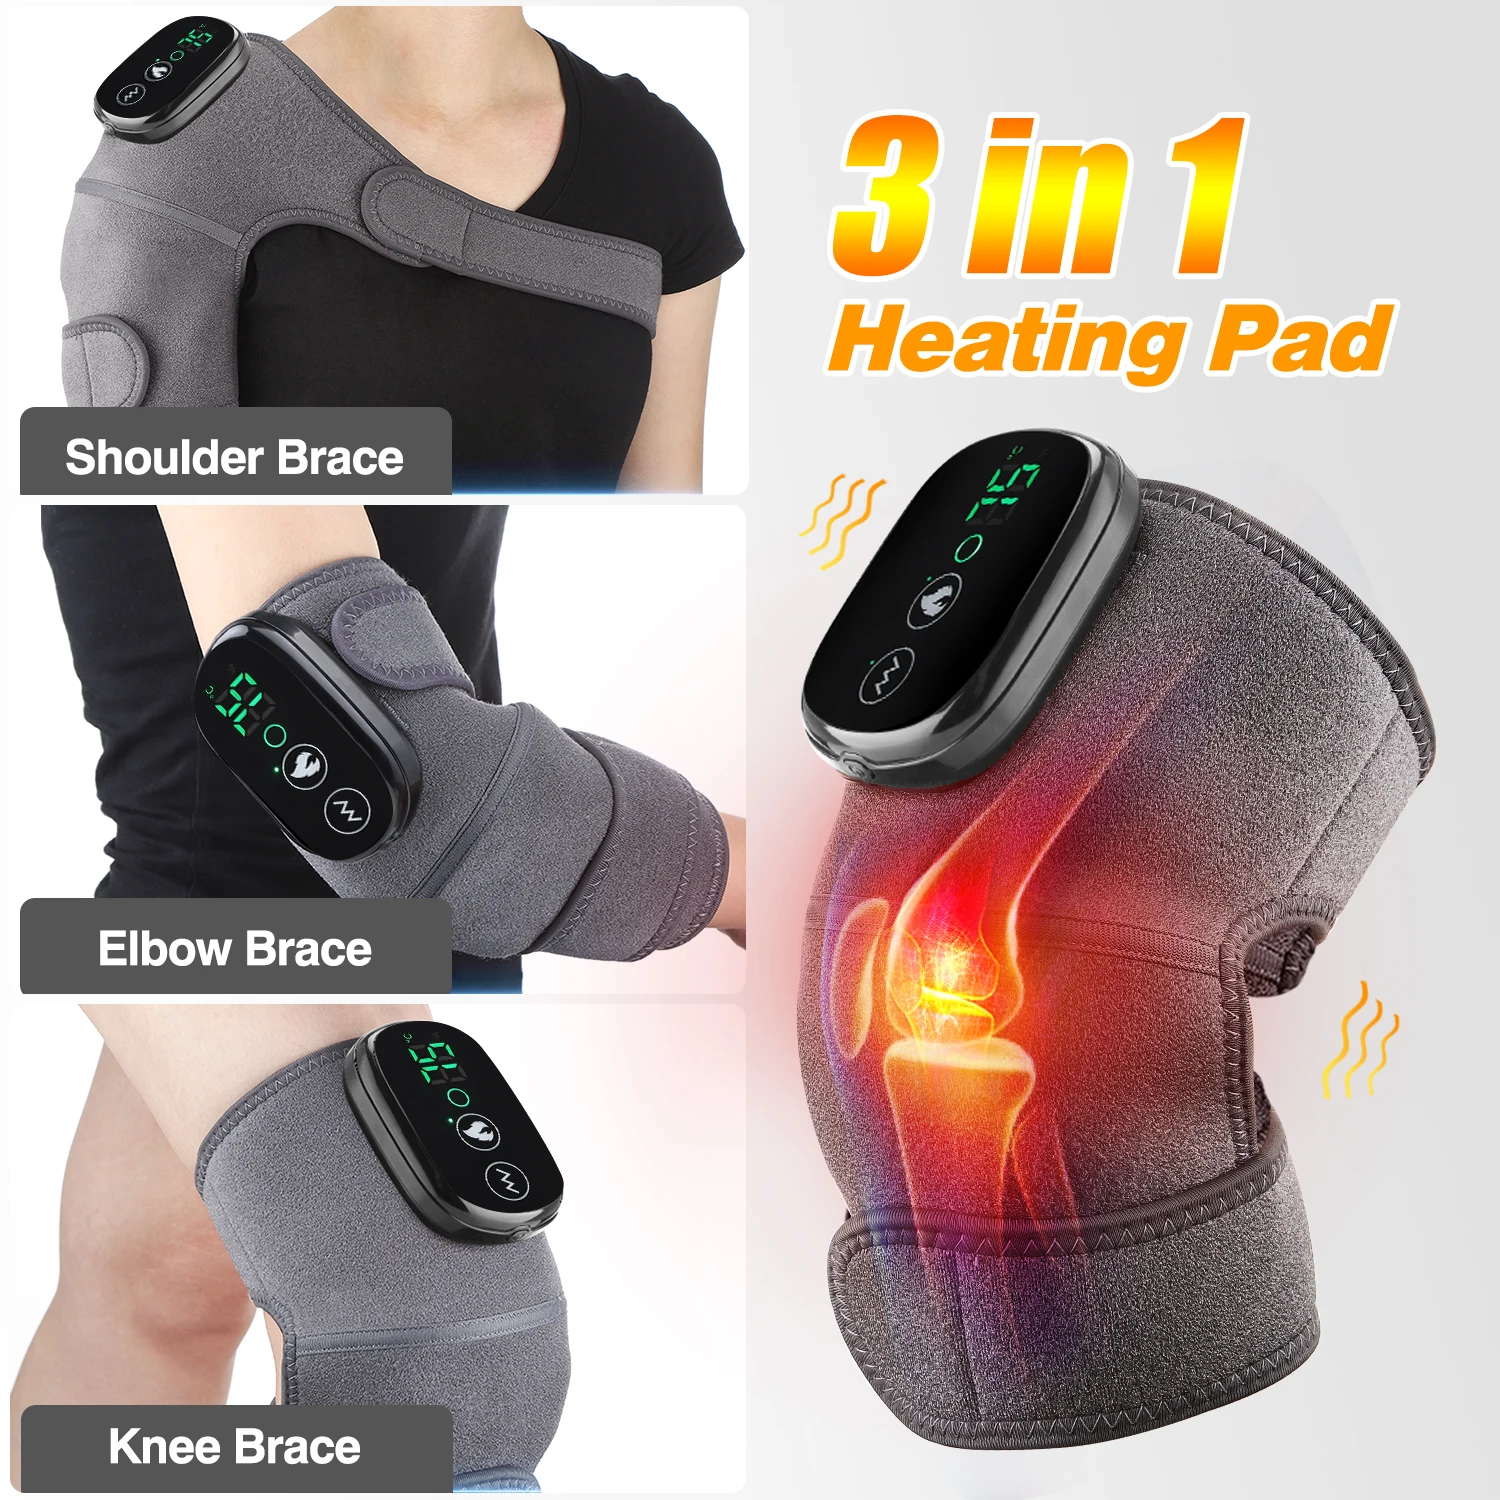 https://ae01.alicdn.com/kf/Se9ce3cc964164d99bbb7f771d2b2b106k/Electric-Heating-Therapy-Knee-Vibration-Massager-Leg-Joint-Physiotherapy-Elbow-Warm-Wrap-Arthritis-Pain-Relief-Pad.jpg